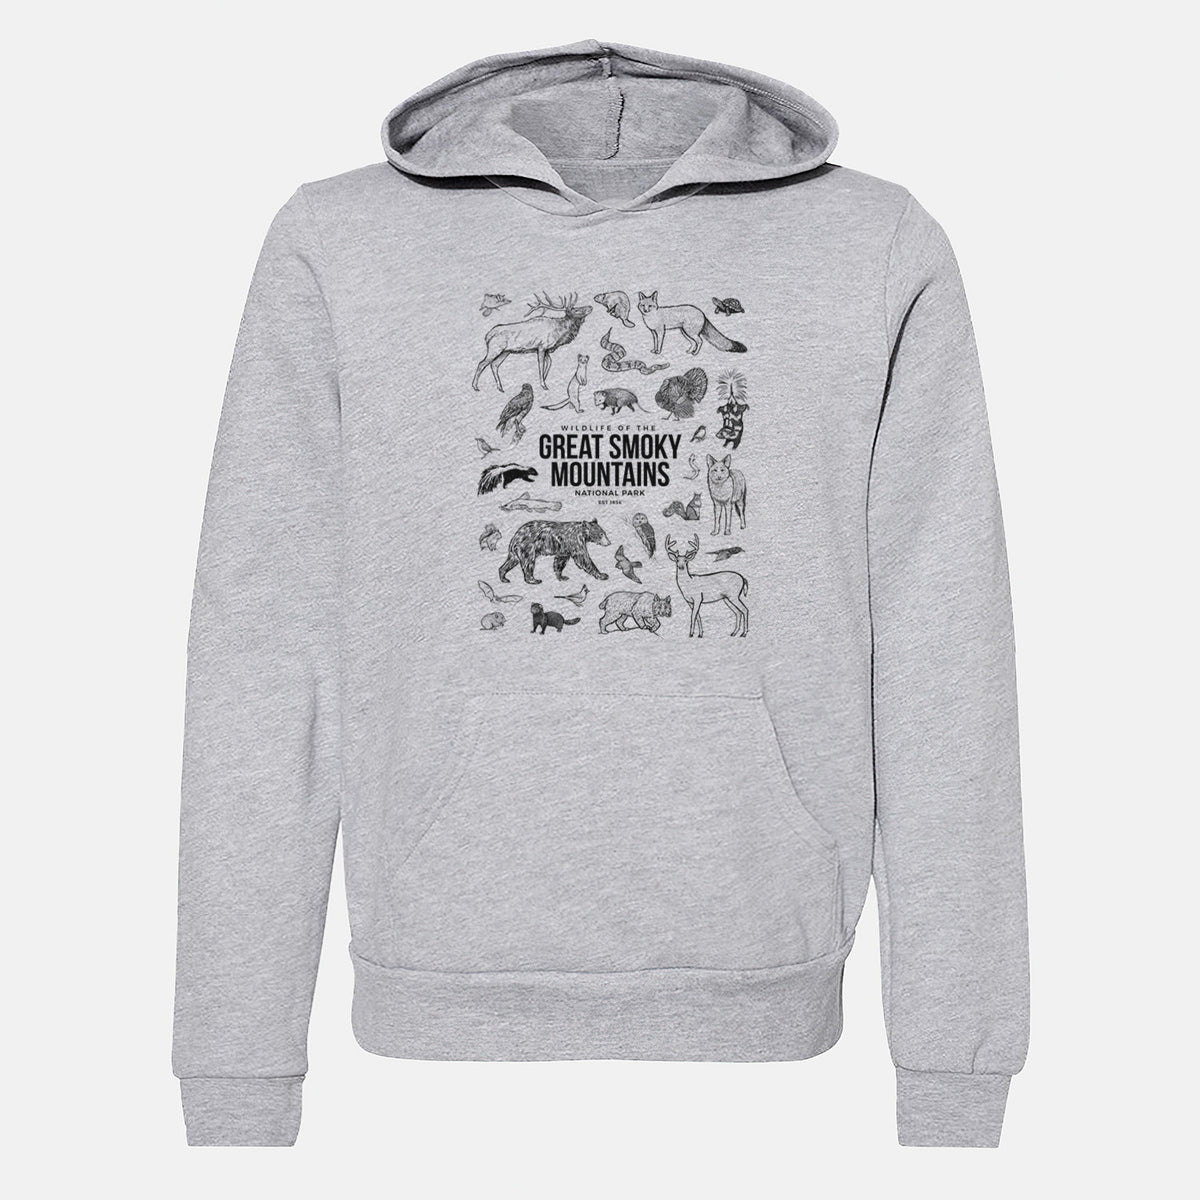 Wildlife of the Great Smoky Mountains National Park - Youth Hoodie Sweatshirt